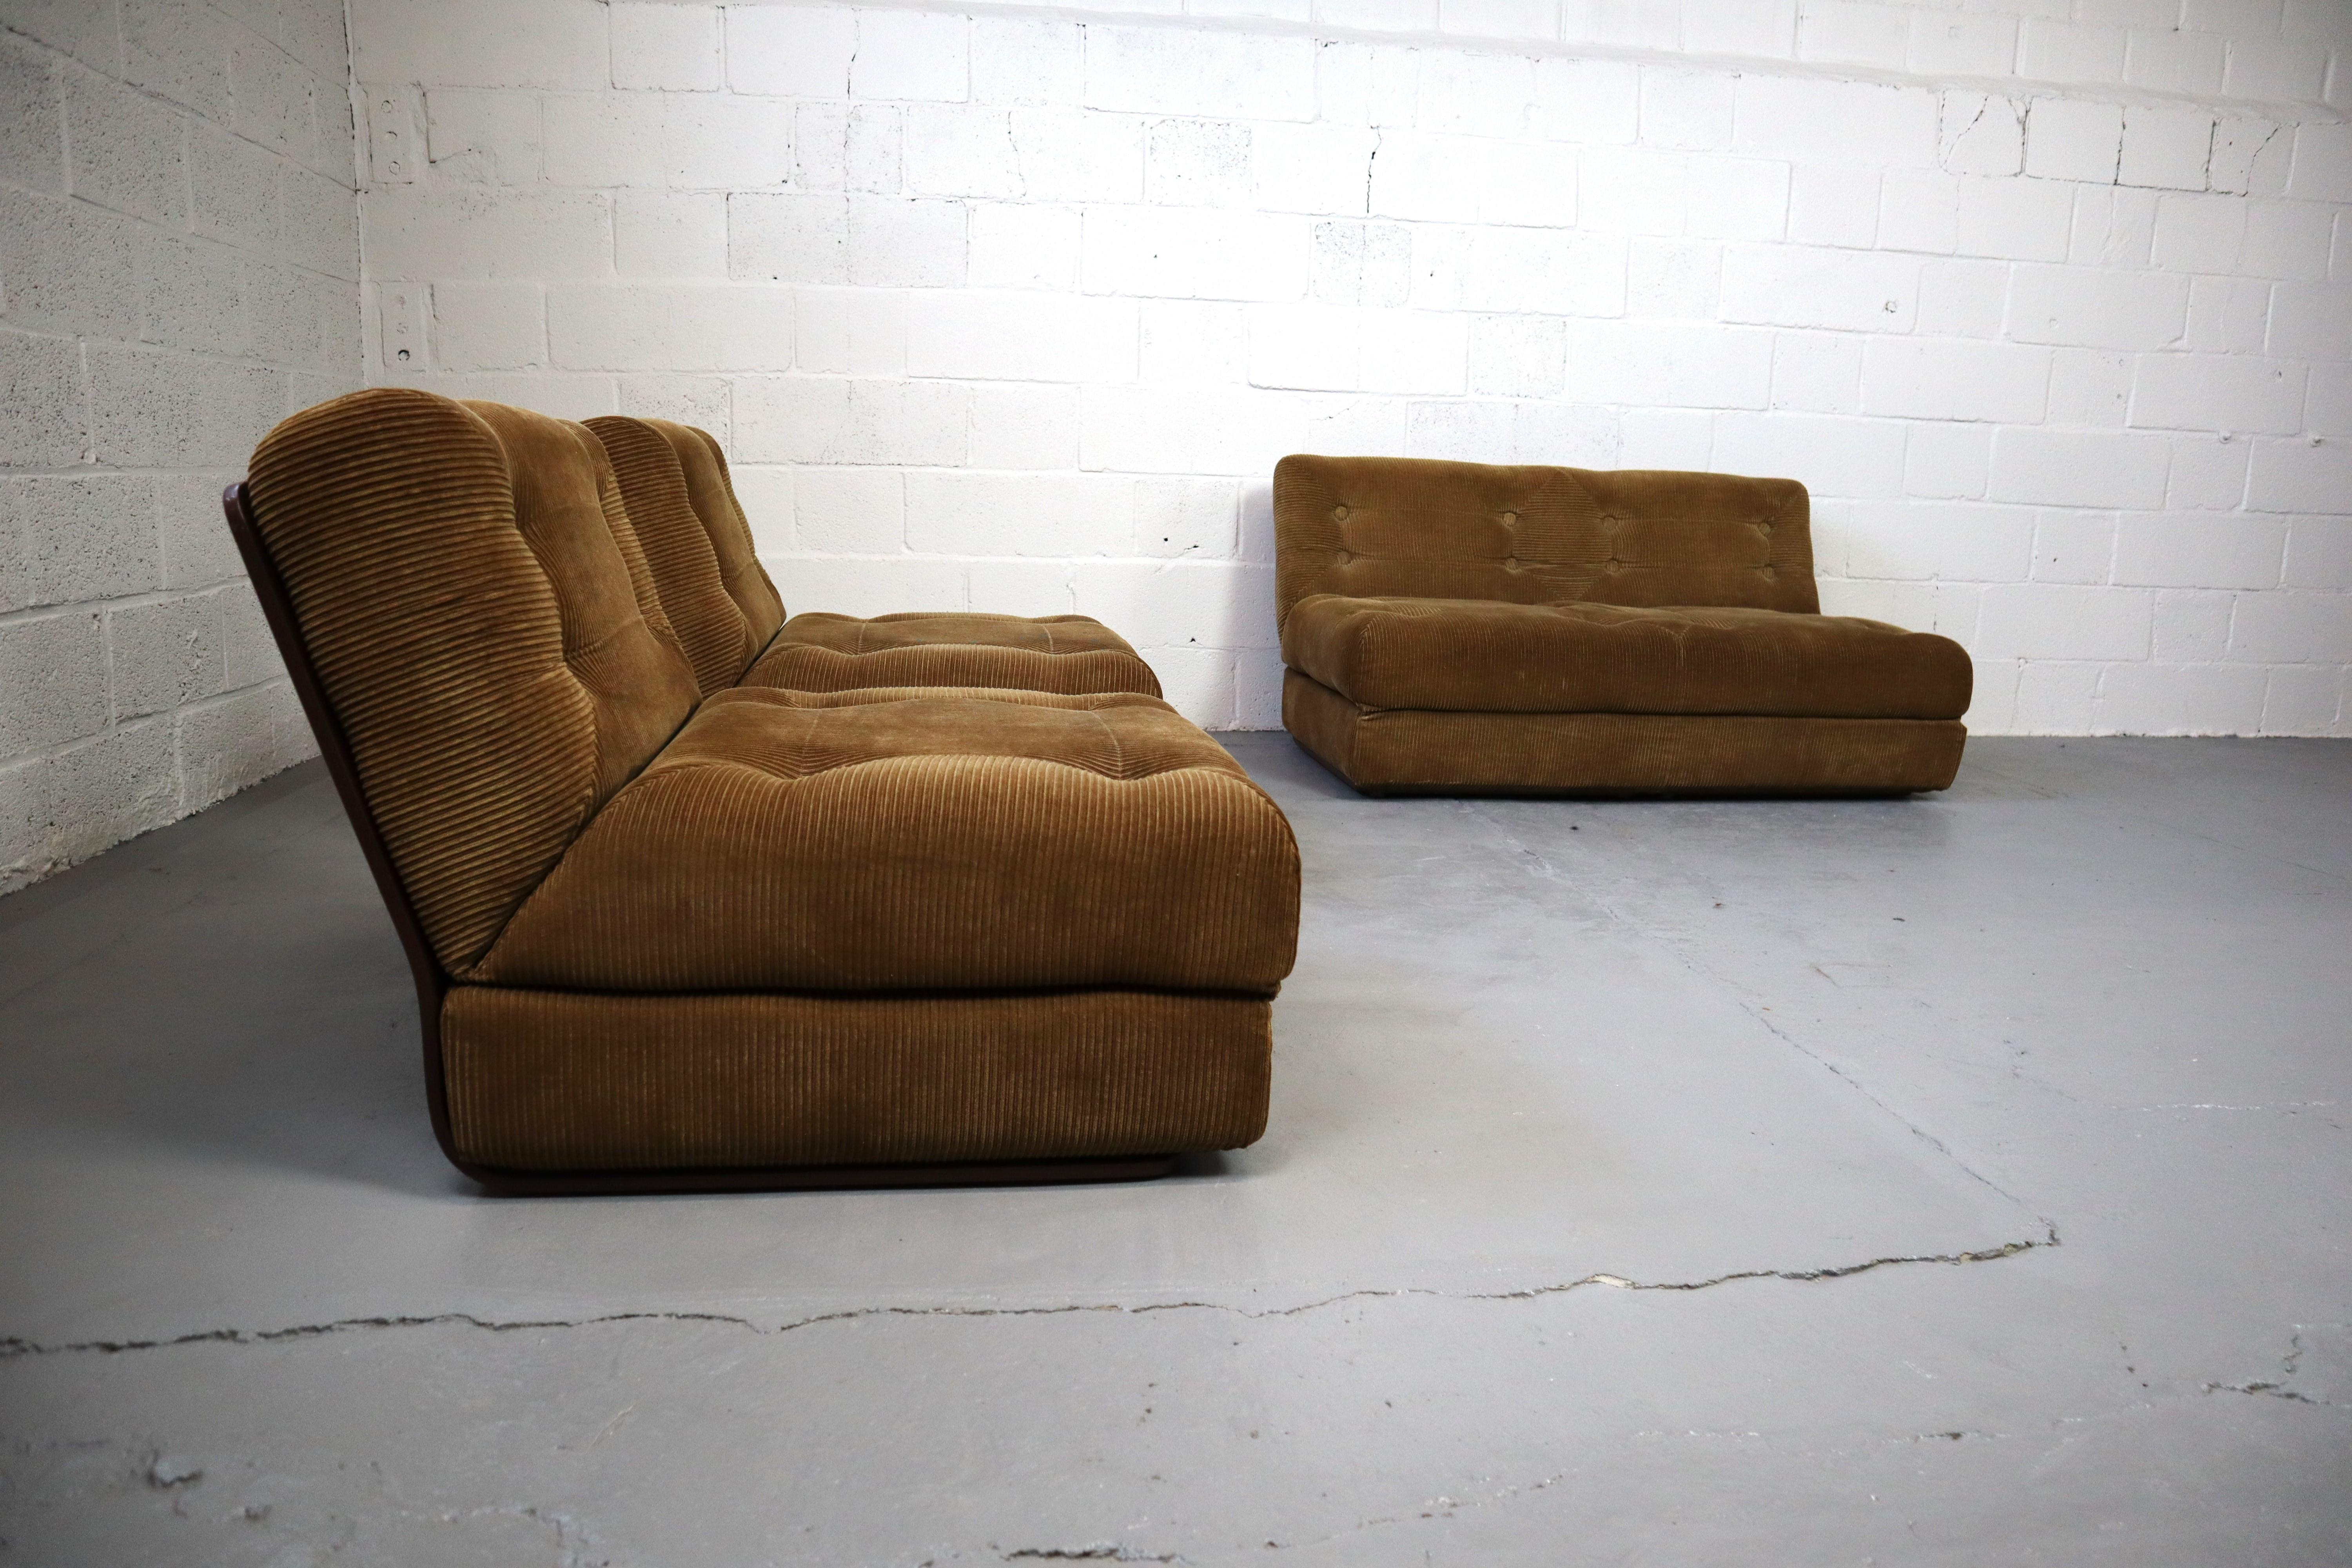 1970's Easy modular lounge chair and sofa by Ahti Taskinen for Myrskylä Oy Finland.
Ahti Taskinen is a interior architect and furniture designer from Finland.
The original corduroy upholstery is still in excellent condition. The chair easily